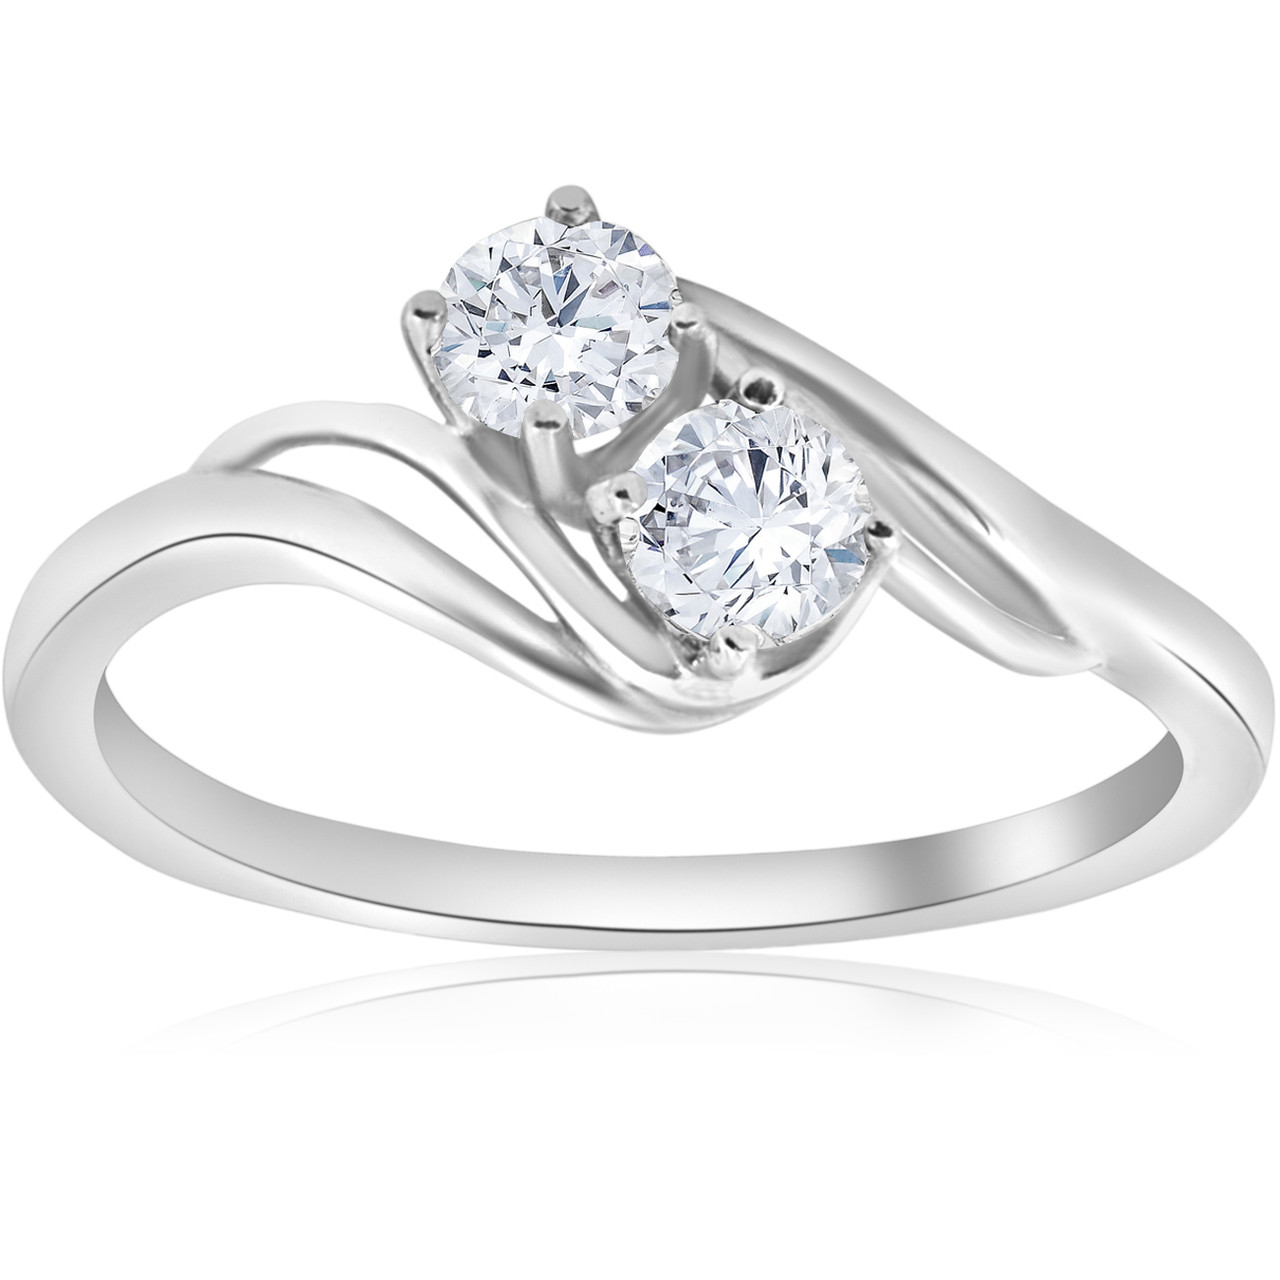 WHITE GOLD ENGAGEMENT RING WITH MARQUISE DIAMOND HALO. 3/8 CT TW - Howard's  Jewelry Center